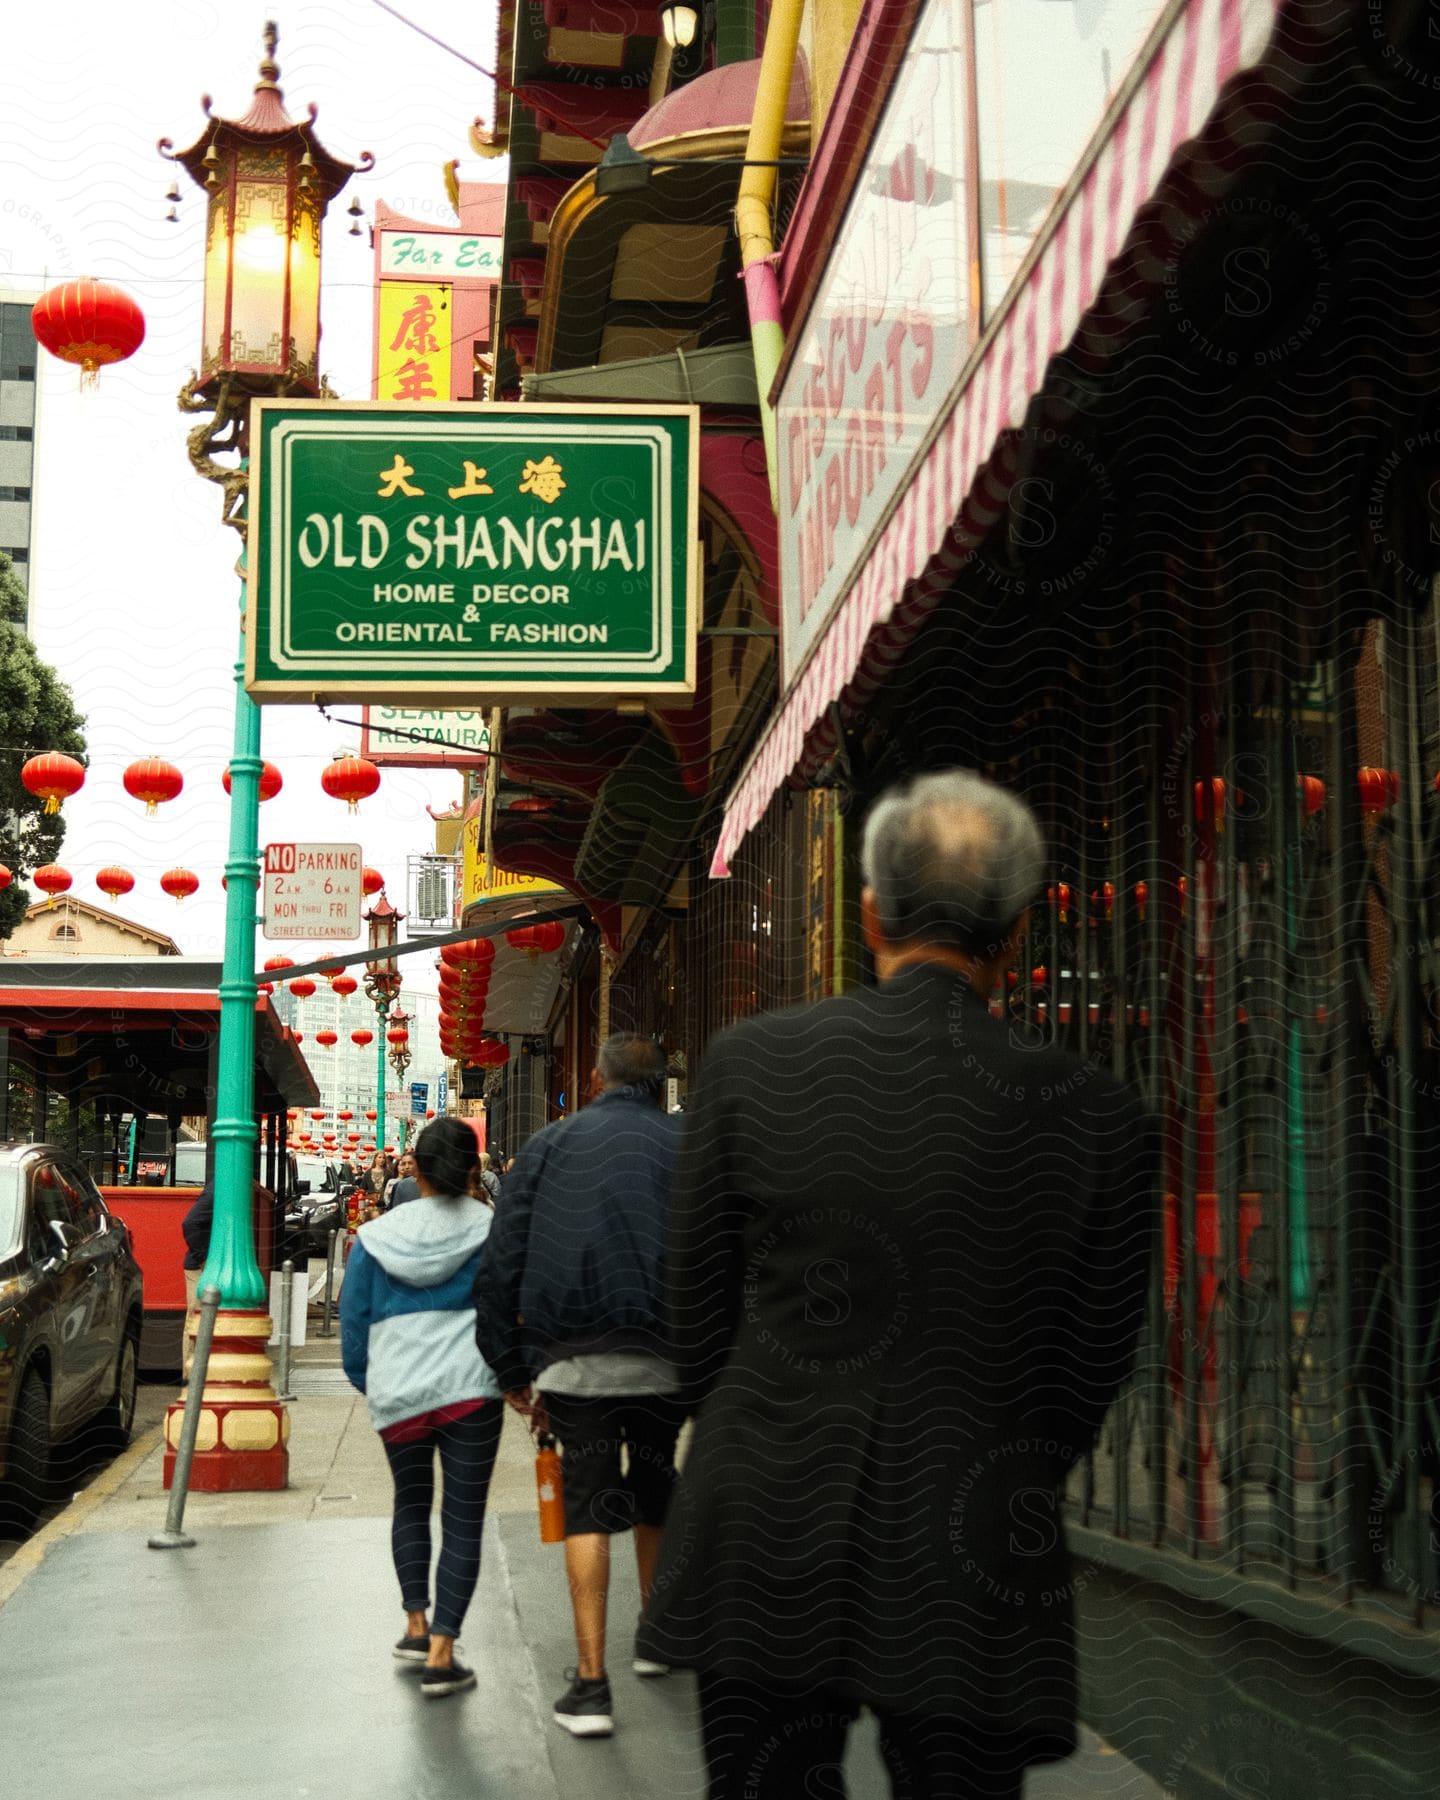 In Chinatown, a family strolls past a building labeled "Old Shanghai."